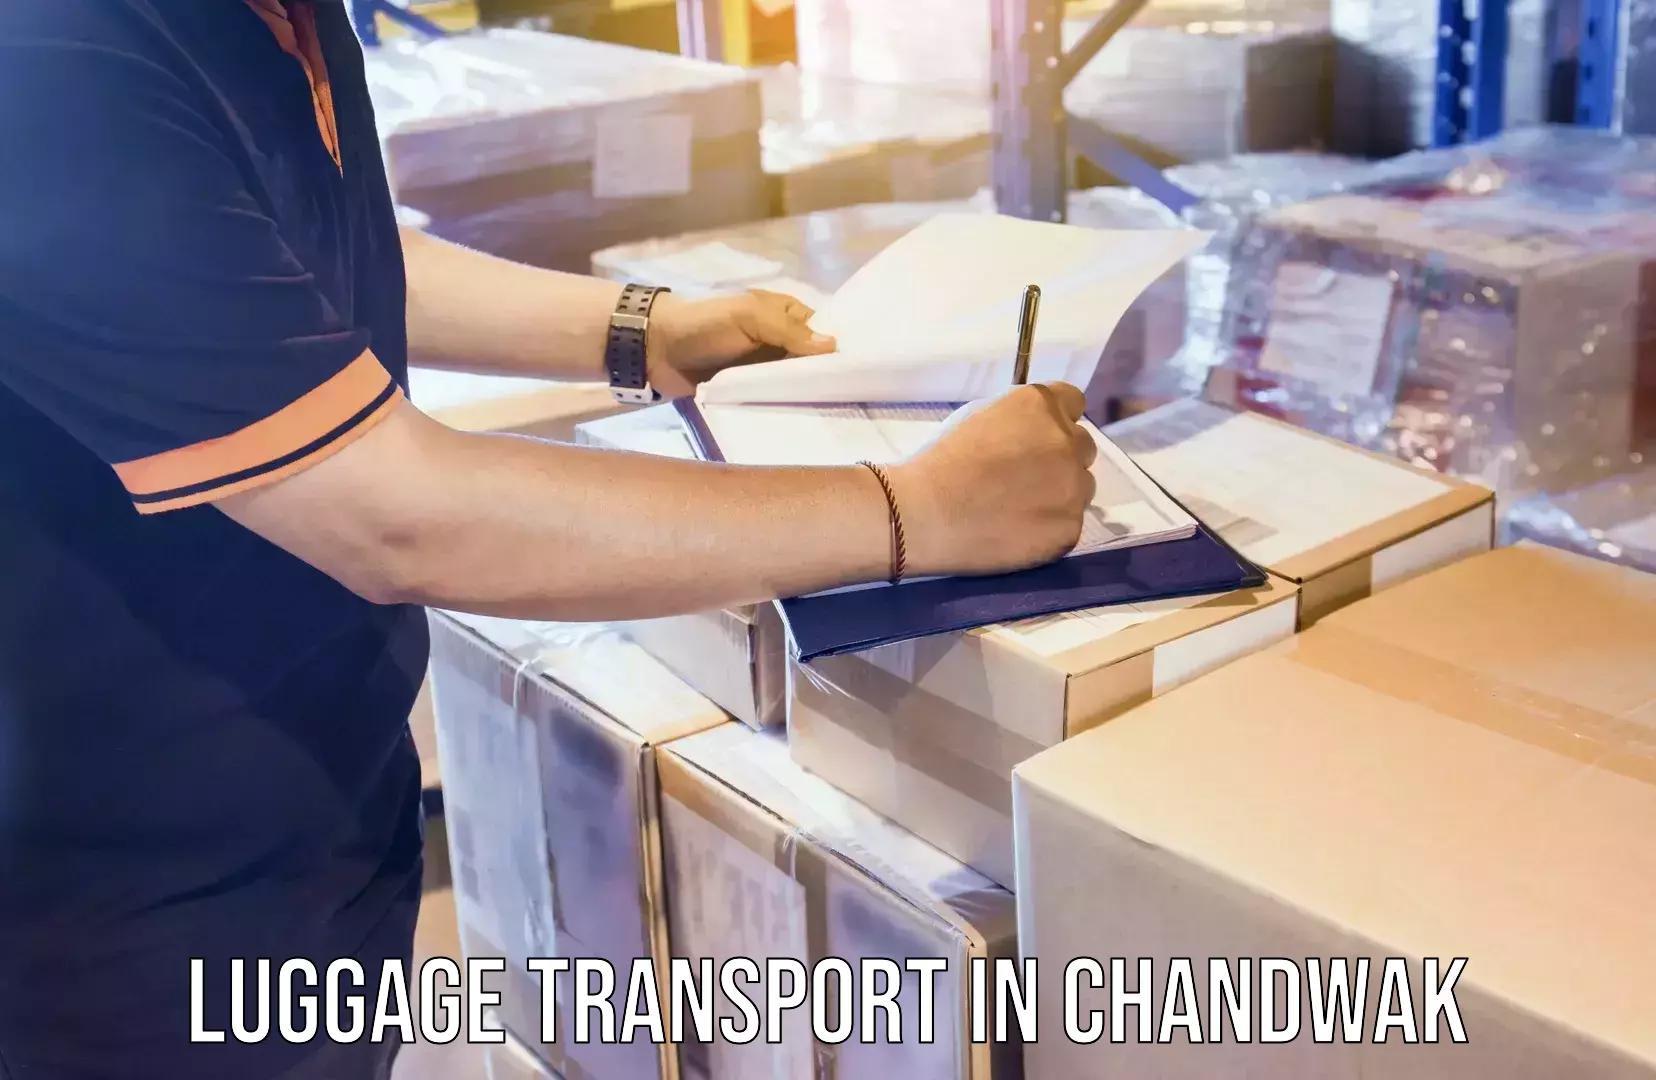 Luggage transport operations in Chandwak